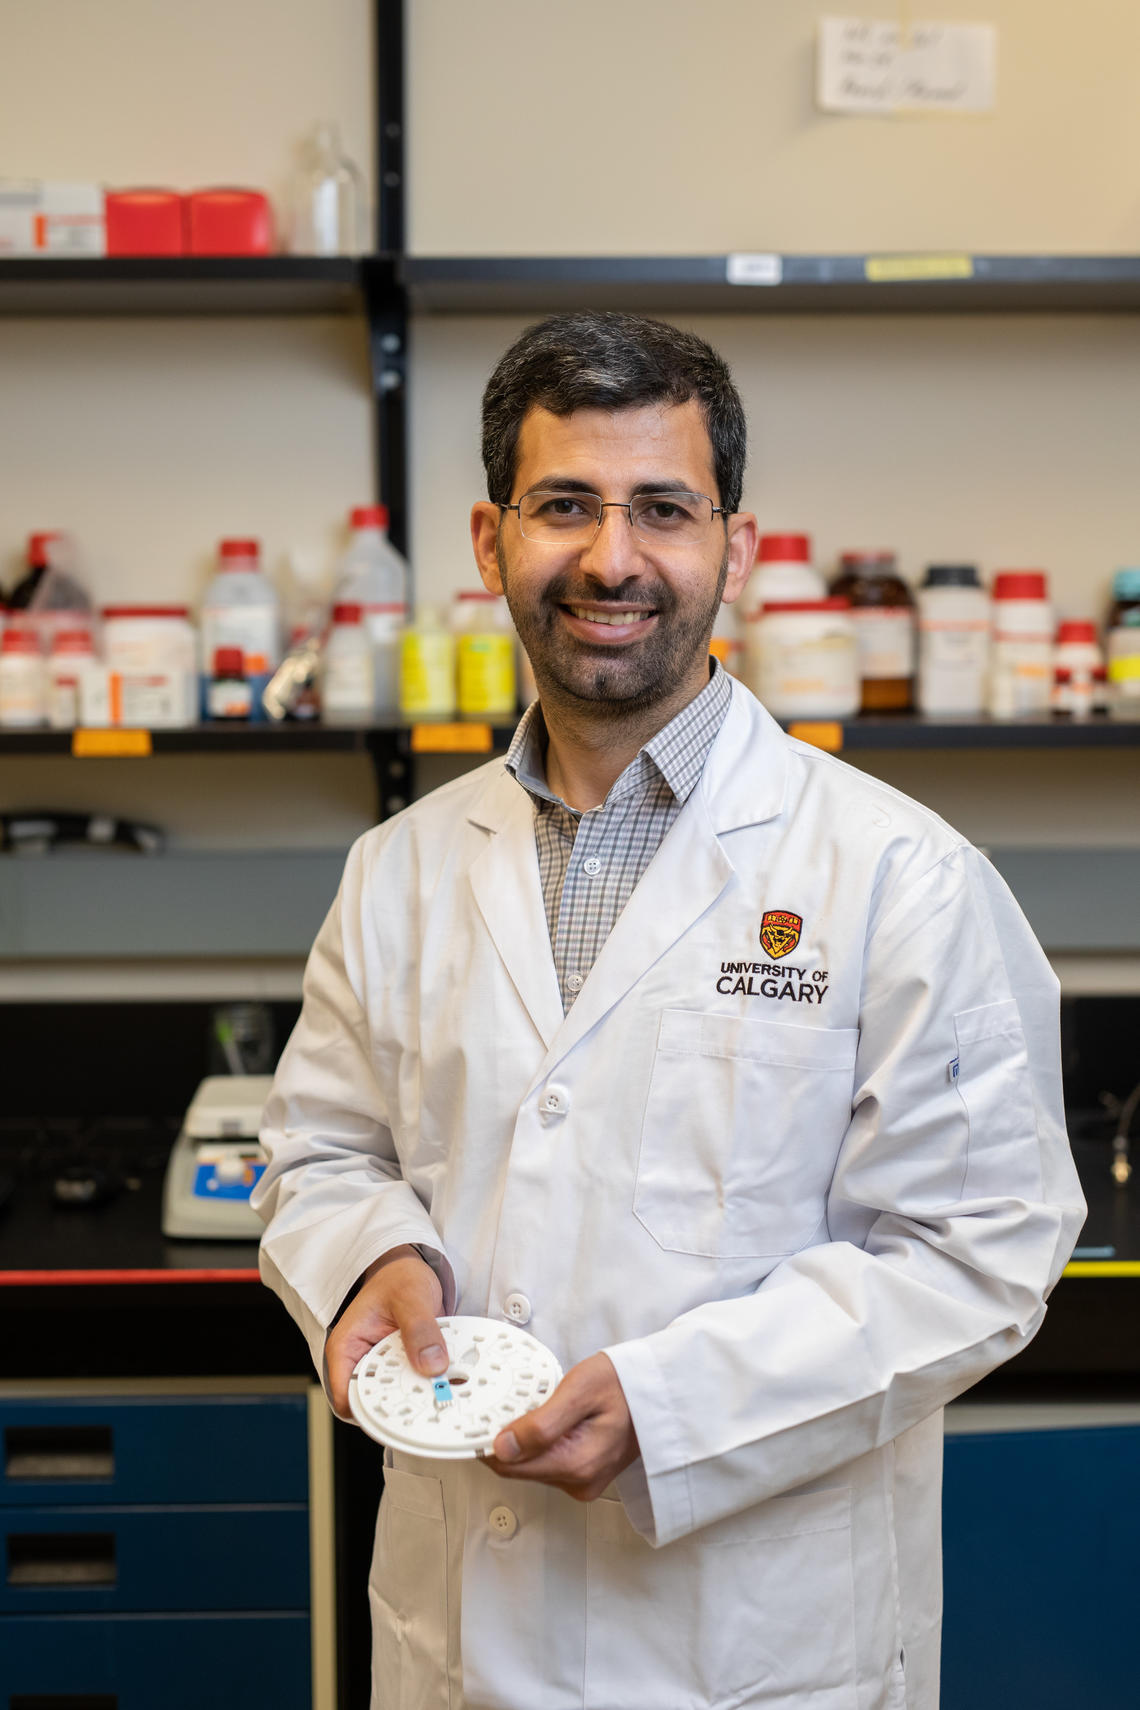 Amir Sanati-Nezhad is assistant professor in the Department of Mechanical and Manufacturing Engineering. His research is working toward quickly and efficiently analyzing every aspect of a blood sample, speeding up treatment time for patients.